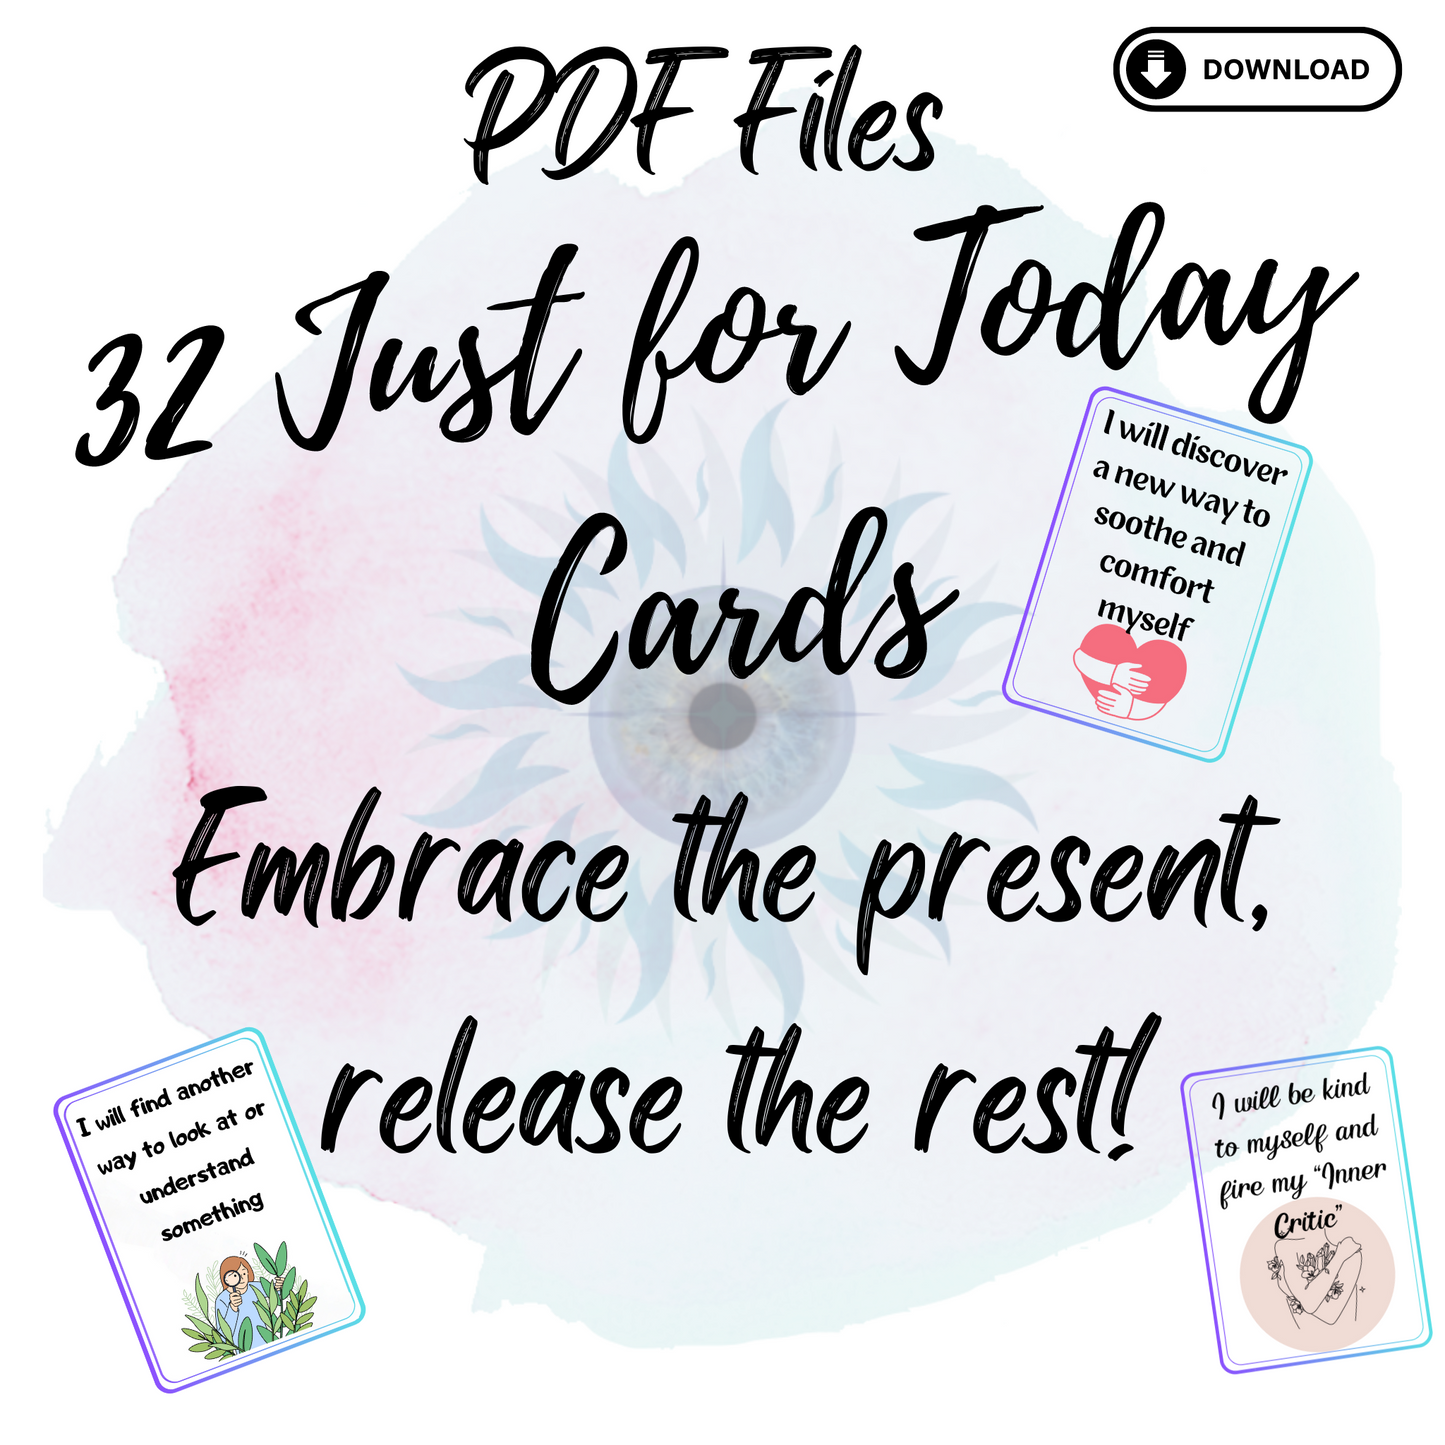 Just for Today Cards PDF Download